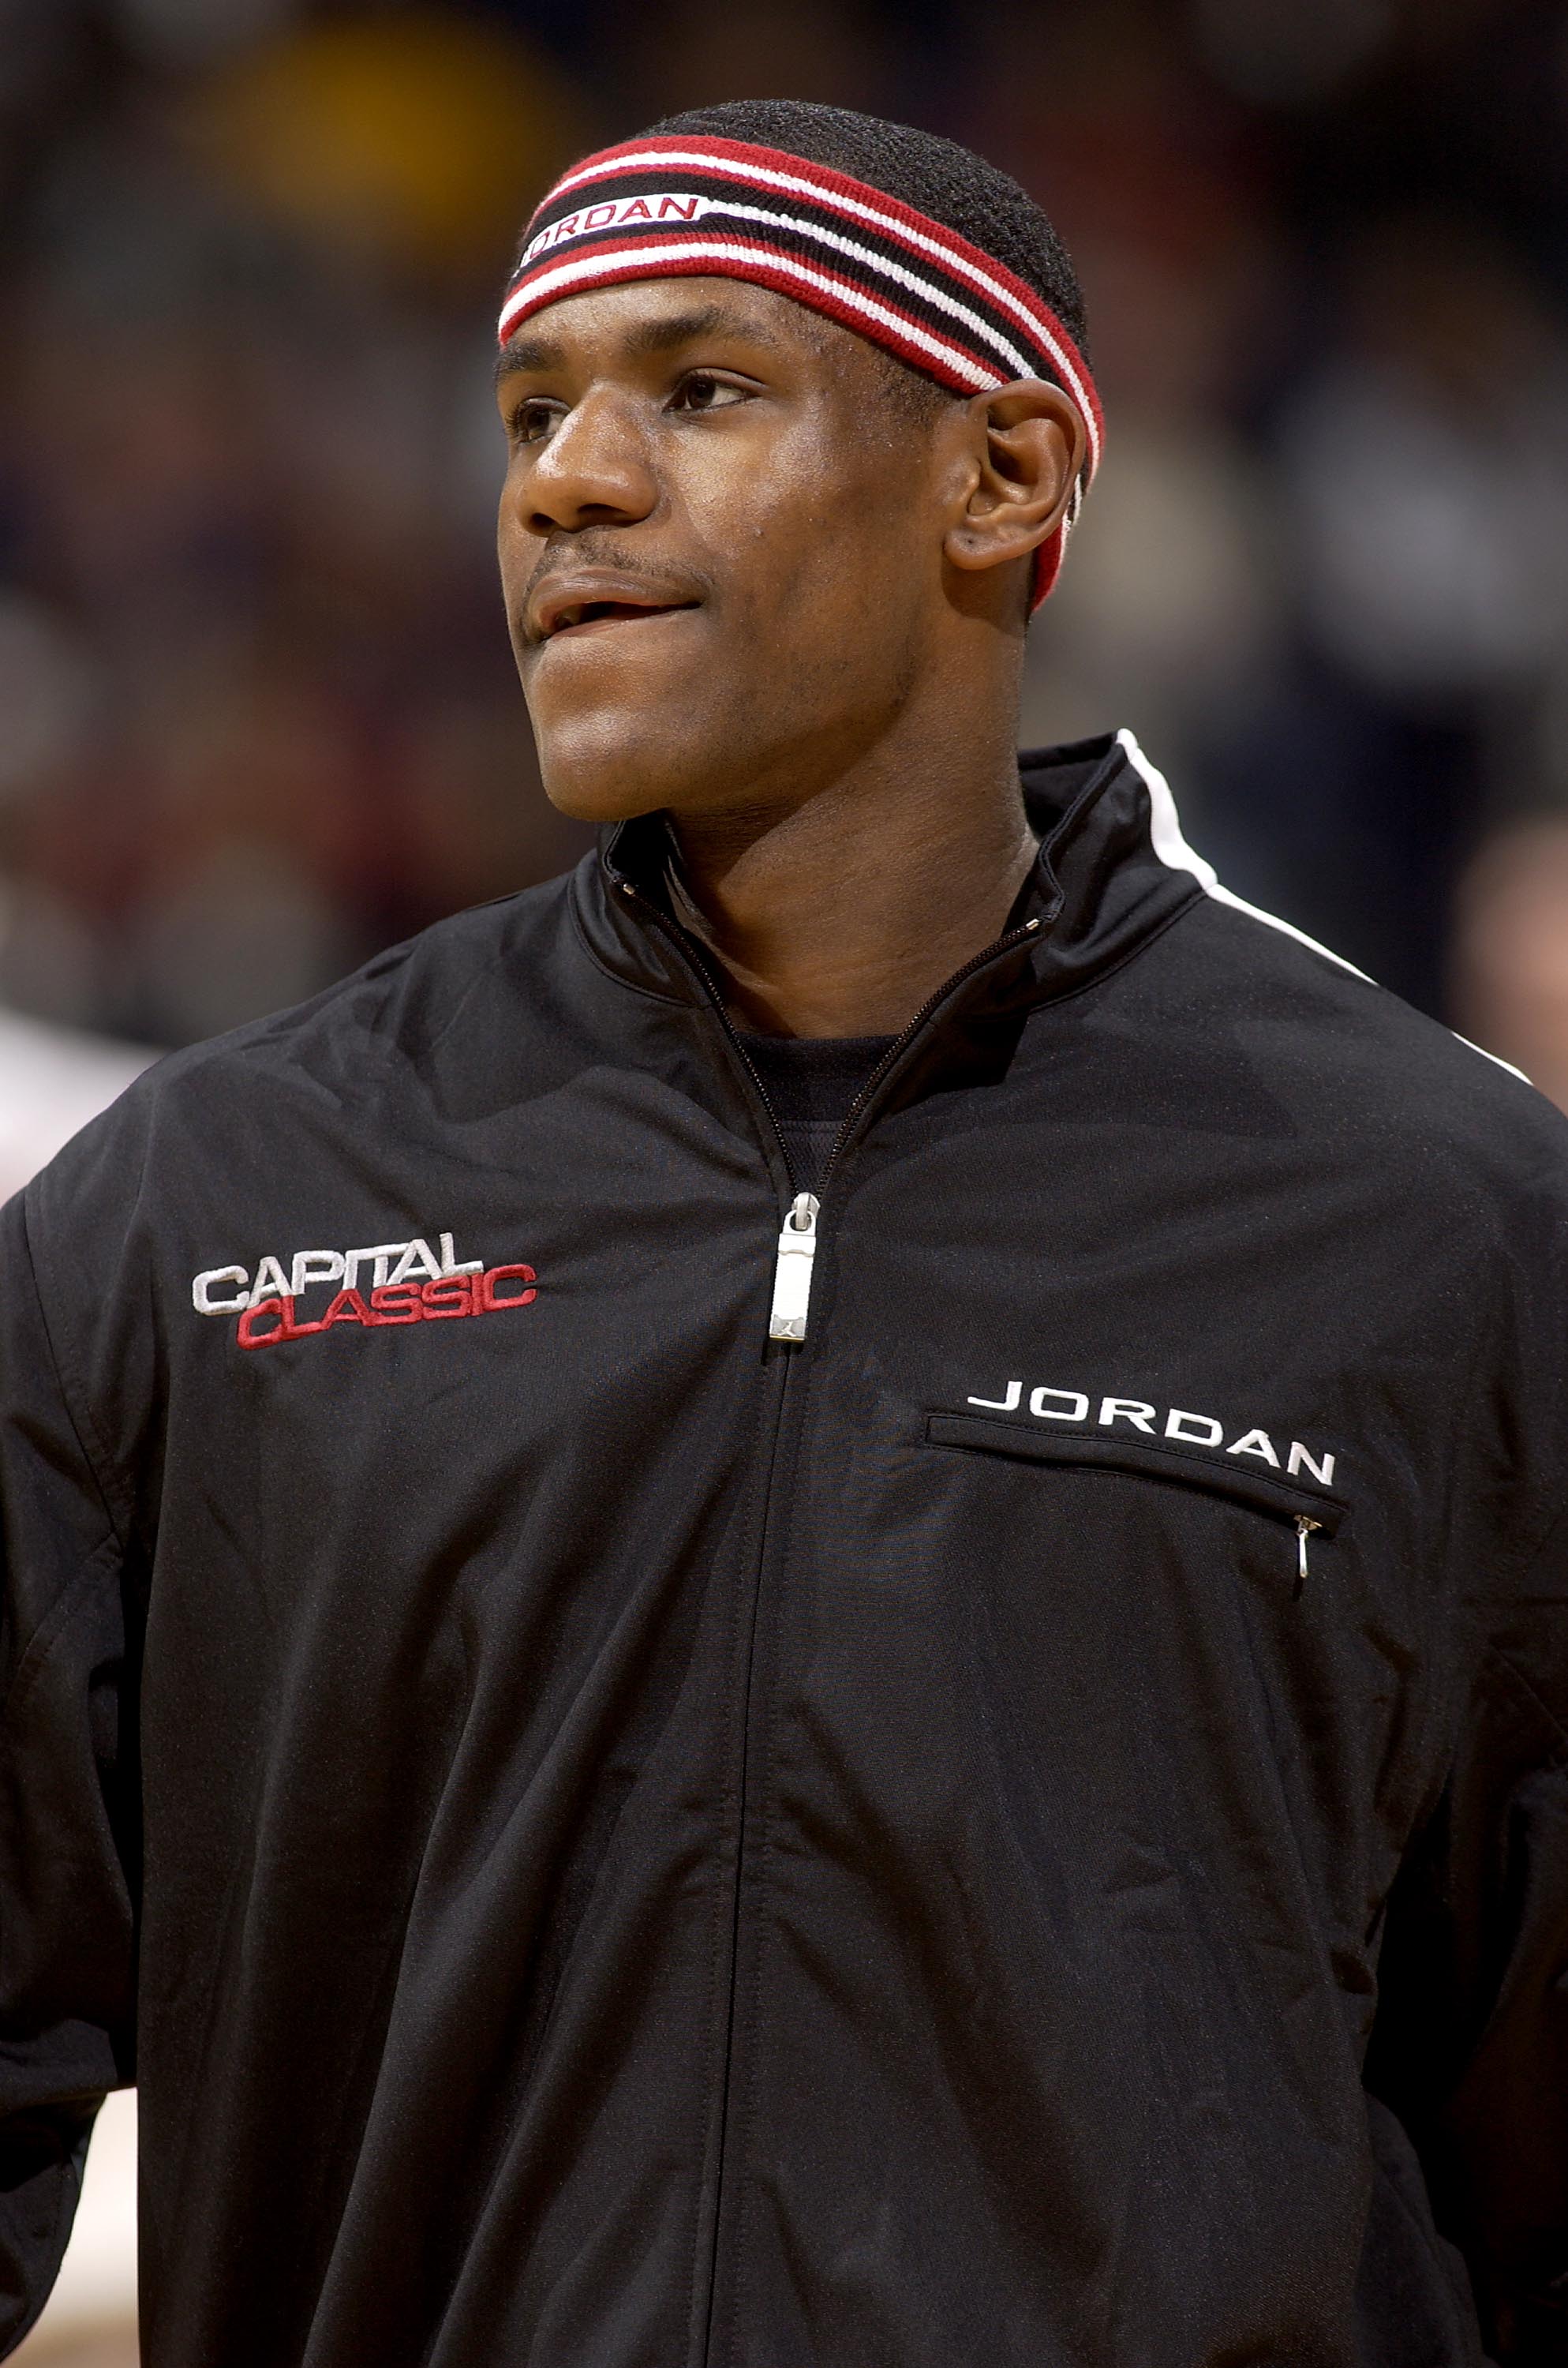 LeBron James warms up before the Jordan Capital Classic on April 17, 2003 in Washington DC | Source: Getty Images